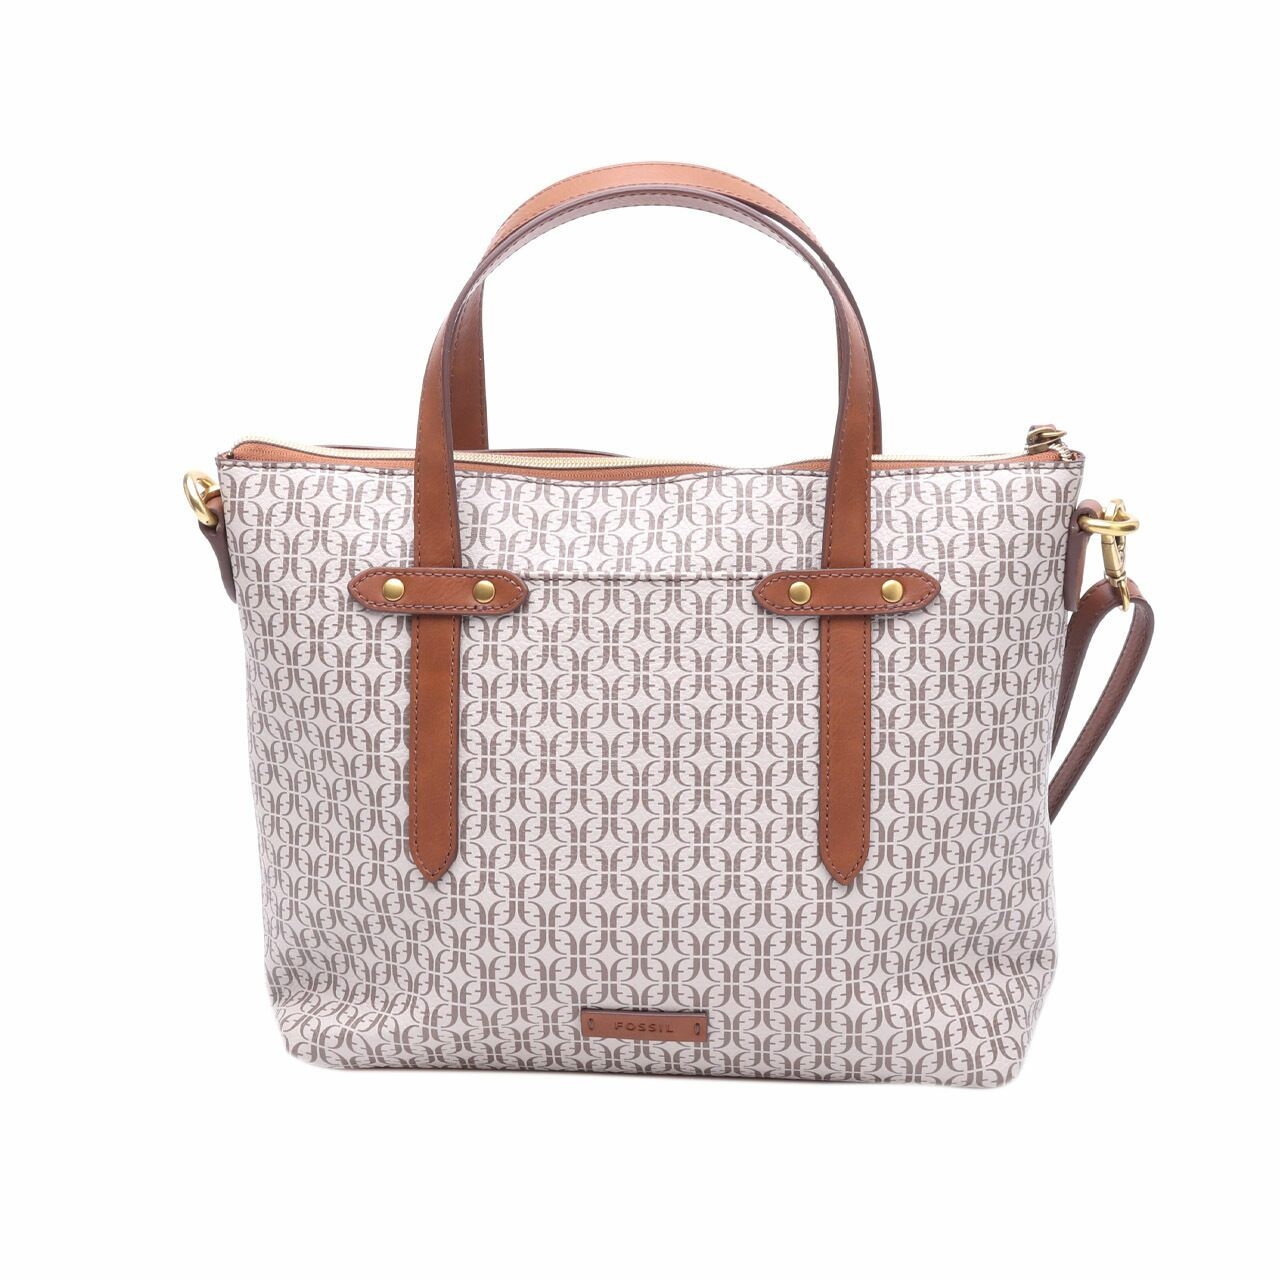 Fossil Felicity Taupe Tan Satchel Bag